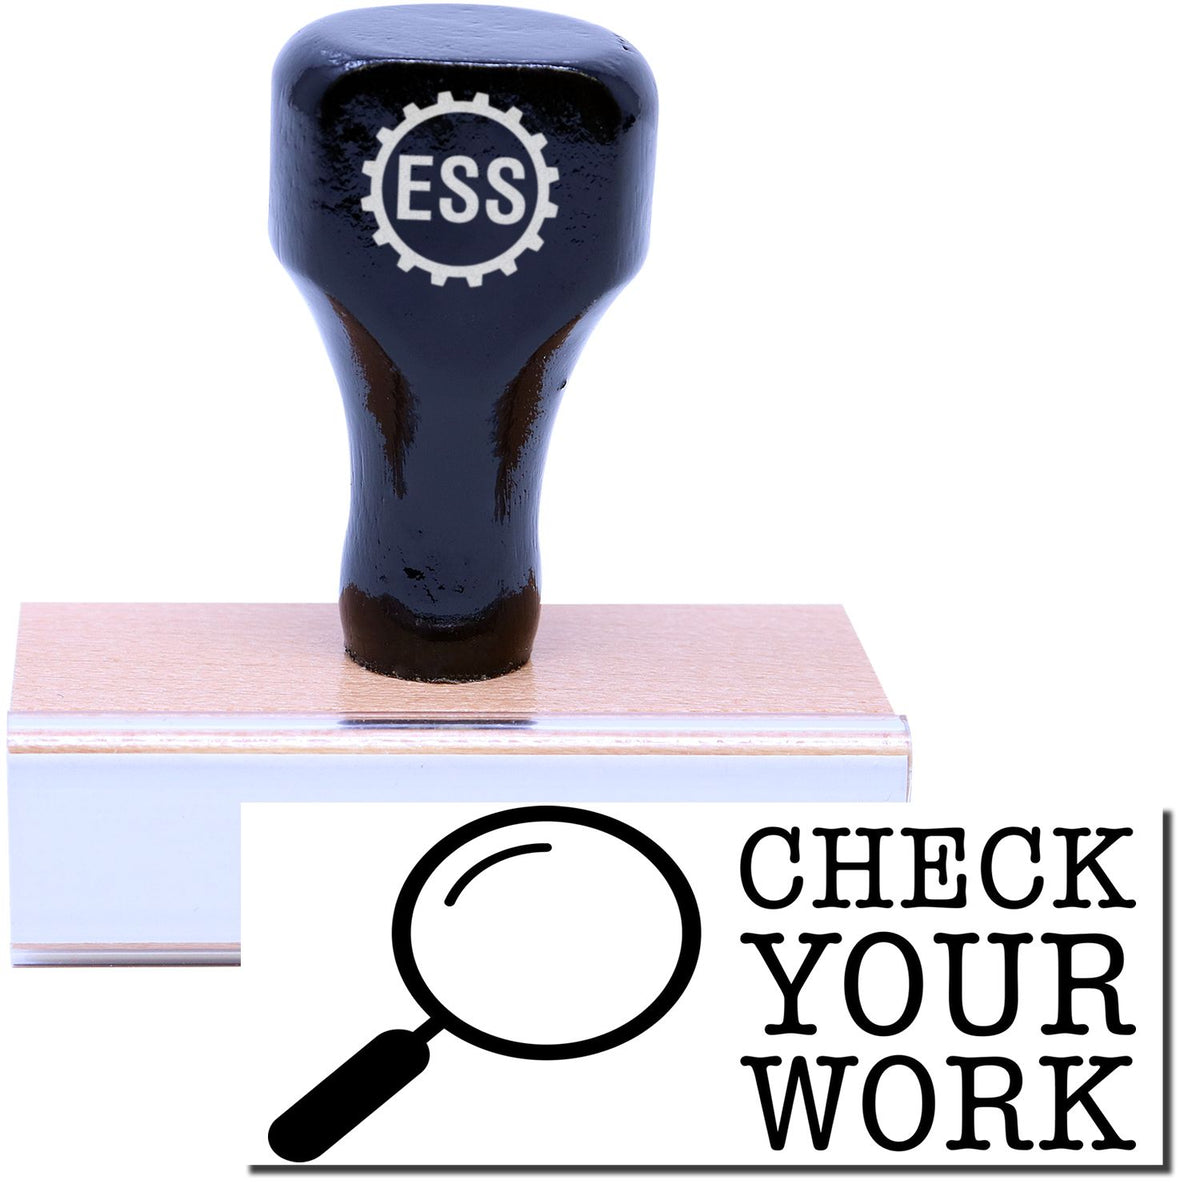 A stock office rubber stamp with a stamped image showing how the text &quot;CHECK YOUR WORK&quot; in a large font with a detective glass on the left side is displayed after stamping.